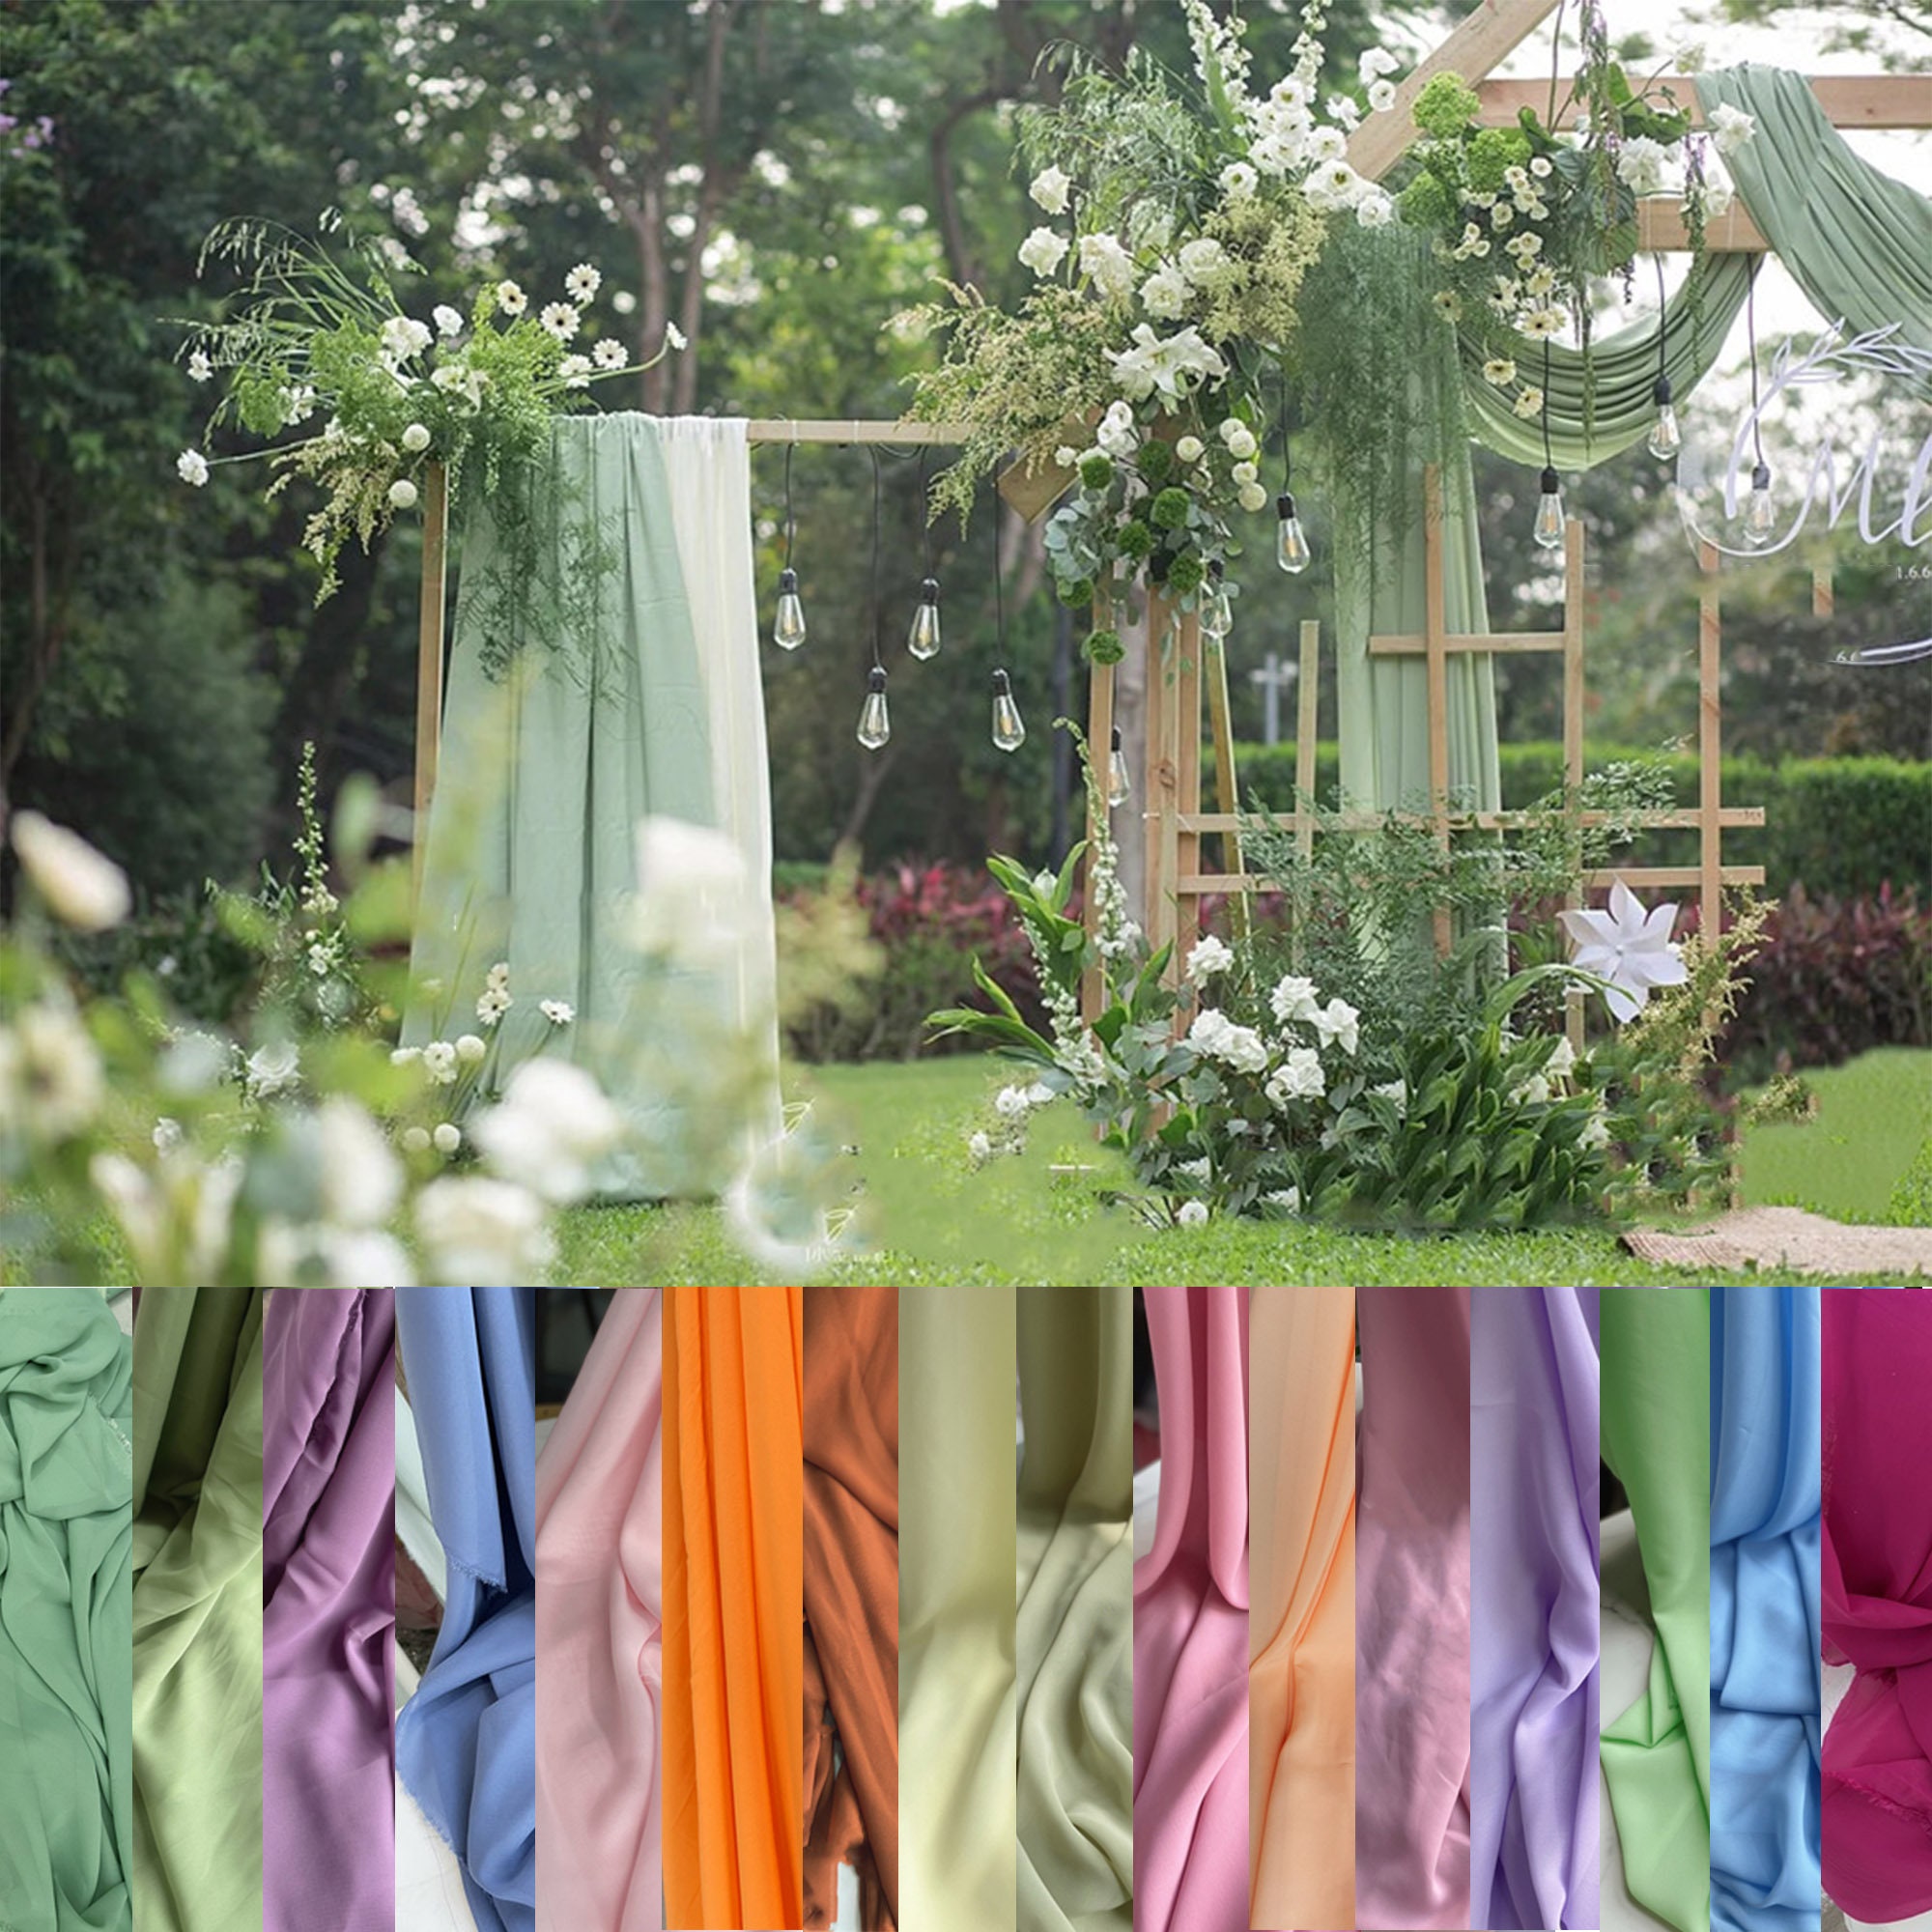 Wedding Arch Draping Fabric Bundle Includes 2 144, 216, 288, 360